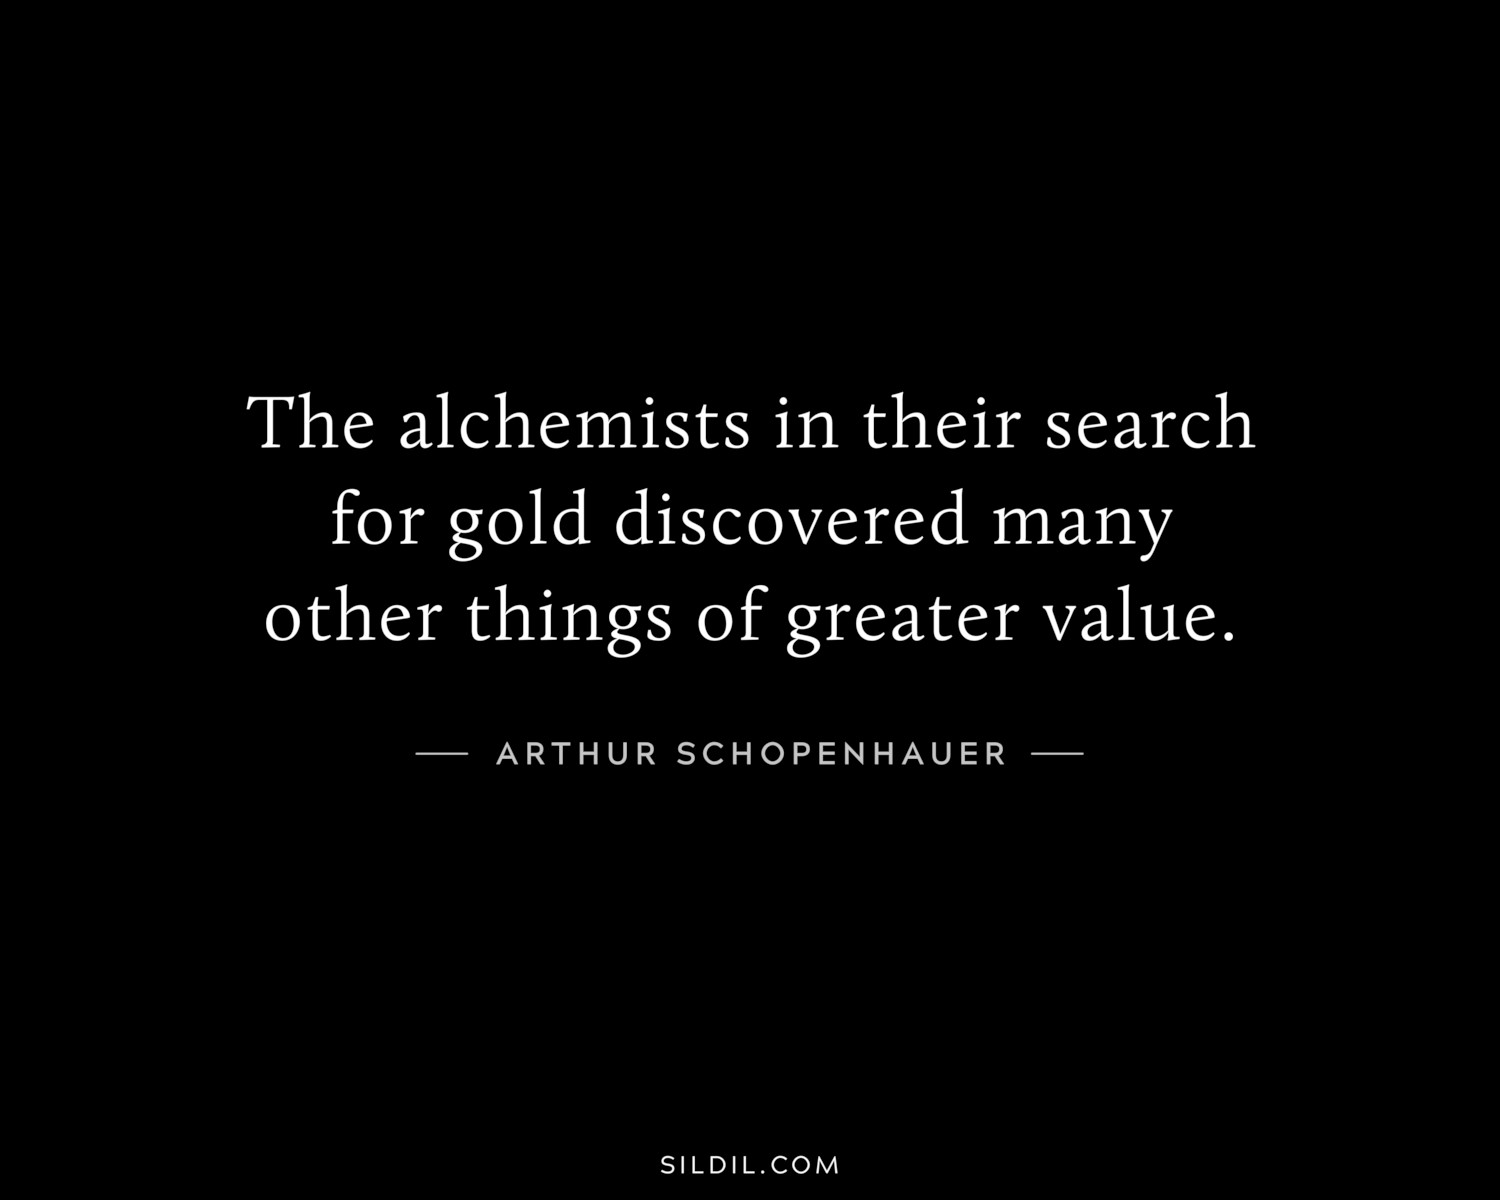 The alchemists in their search for gold discovered many other things of greater value.